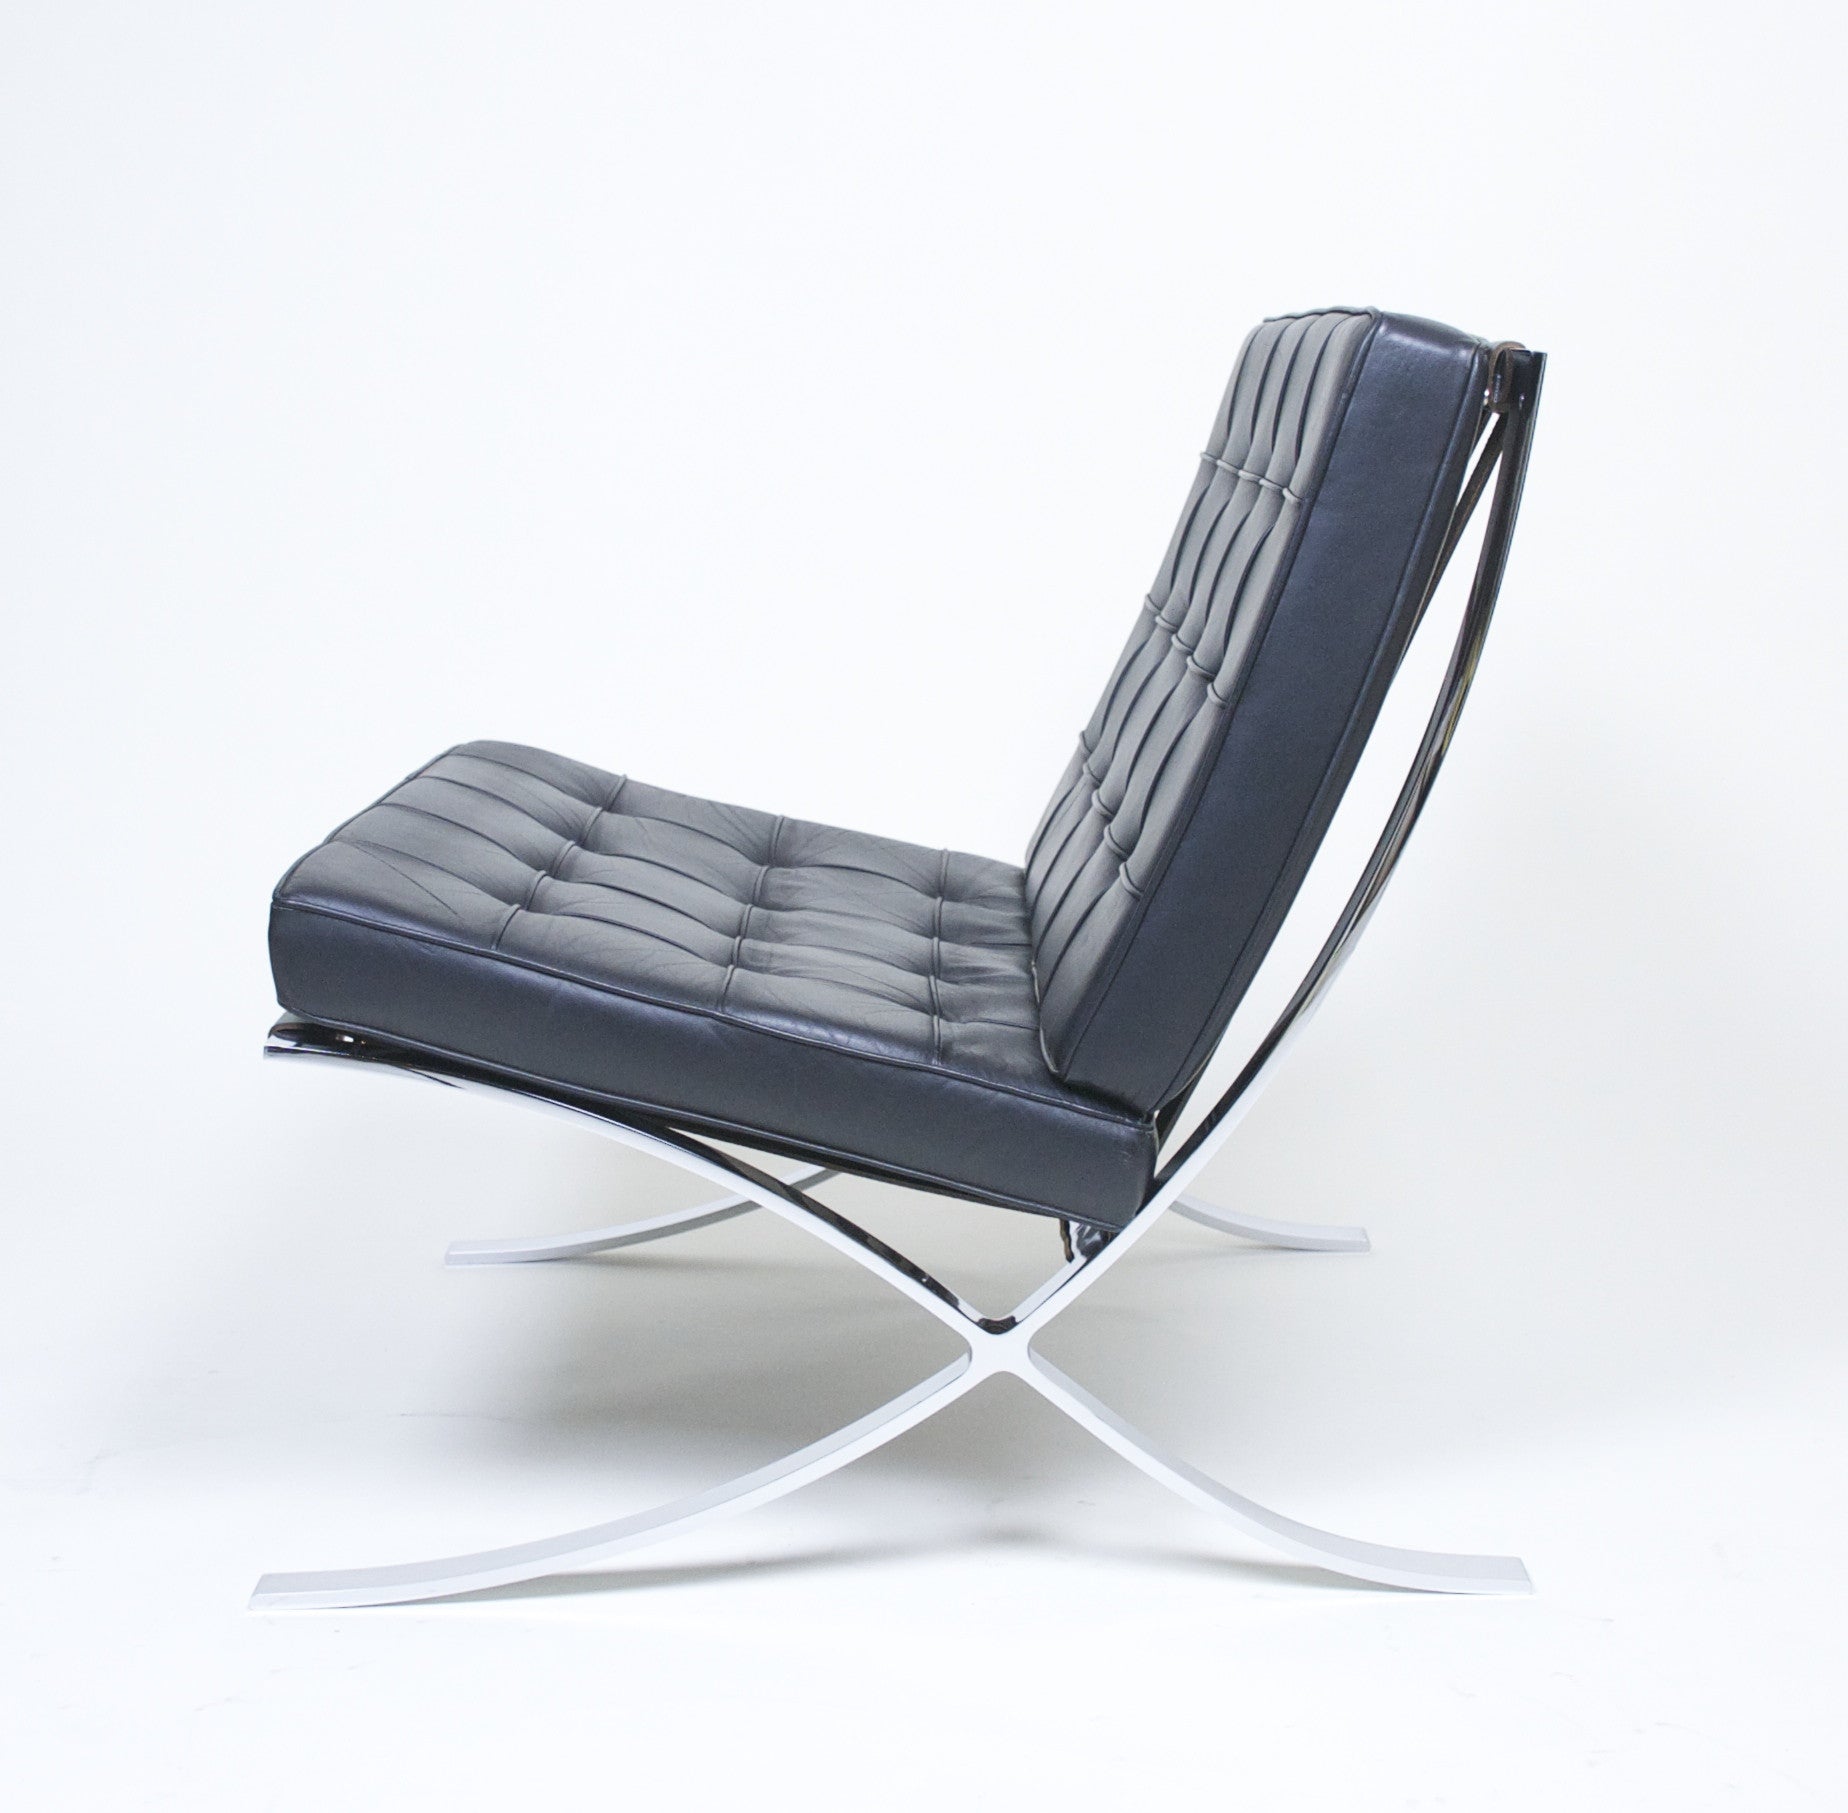 SOLD Knoll Barcelona Chair Mies Van Der Rohe Black Leather #2